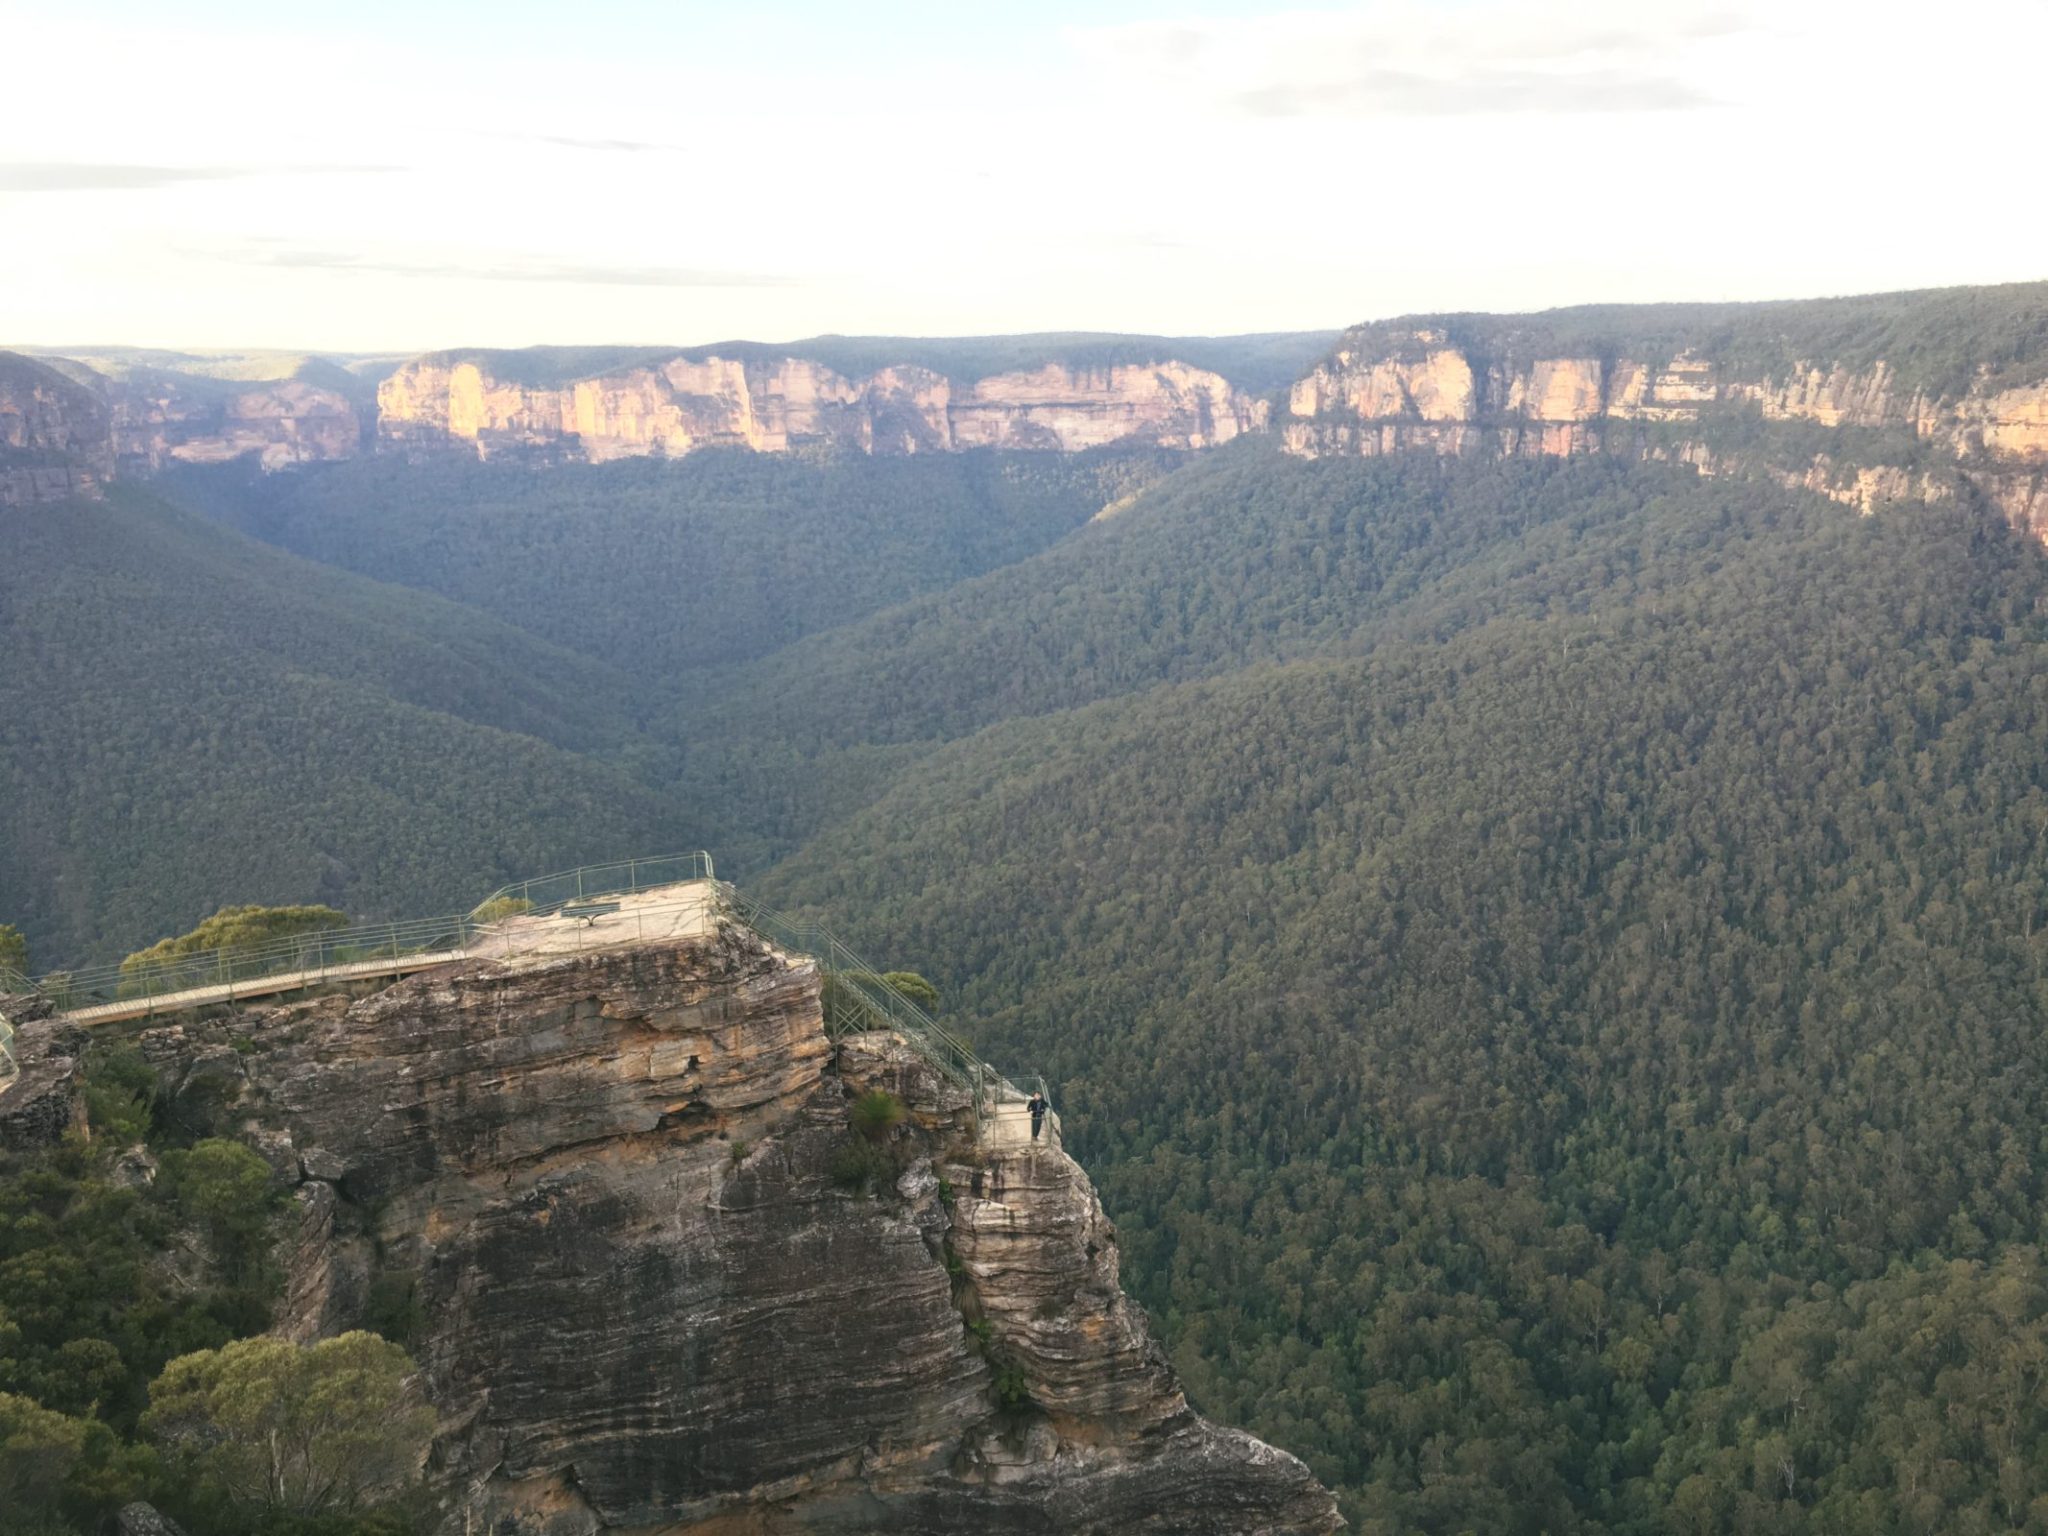 Sydney and New South Wales Road Trip Itinerary, Day 1 & 2: Blue Mountains